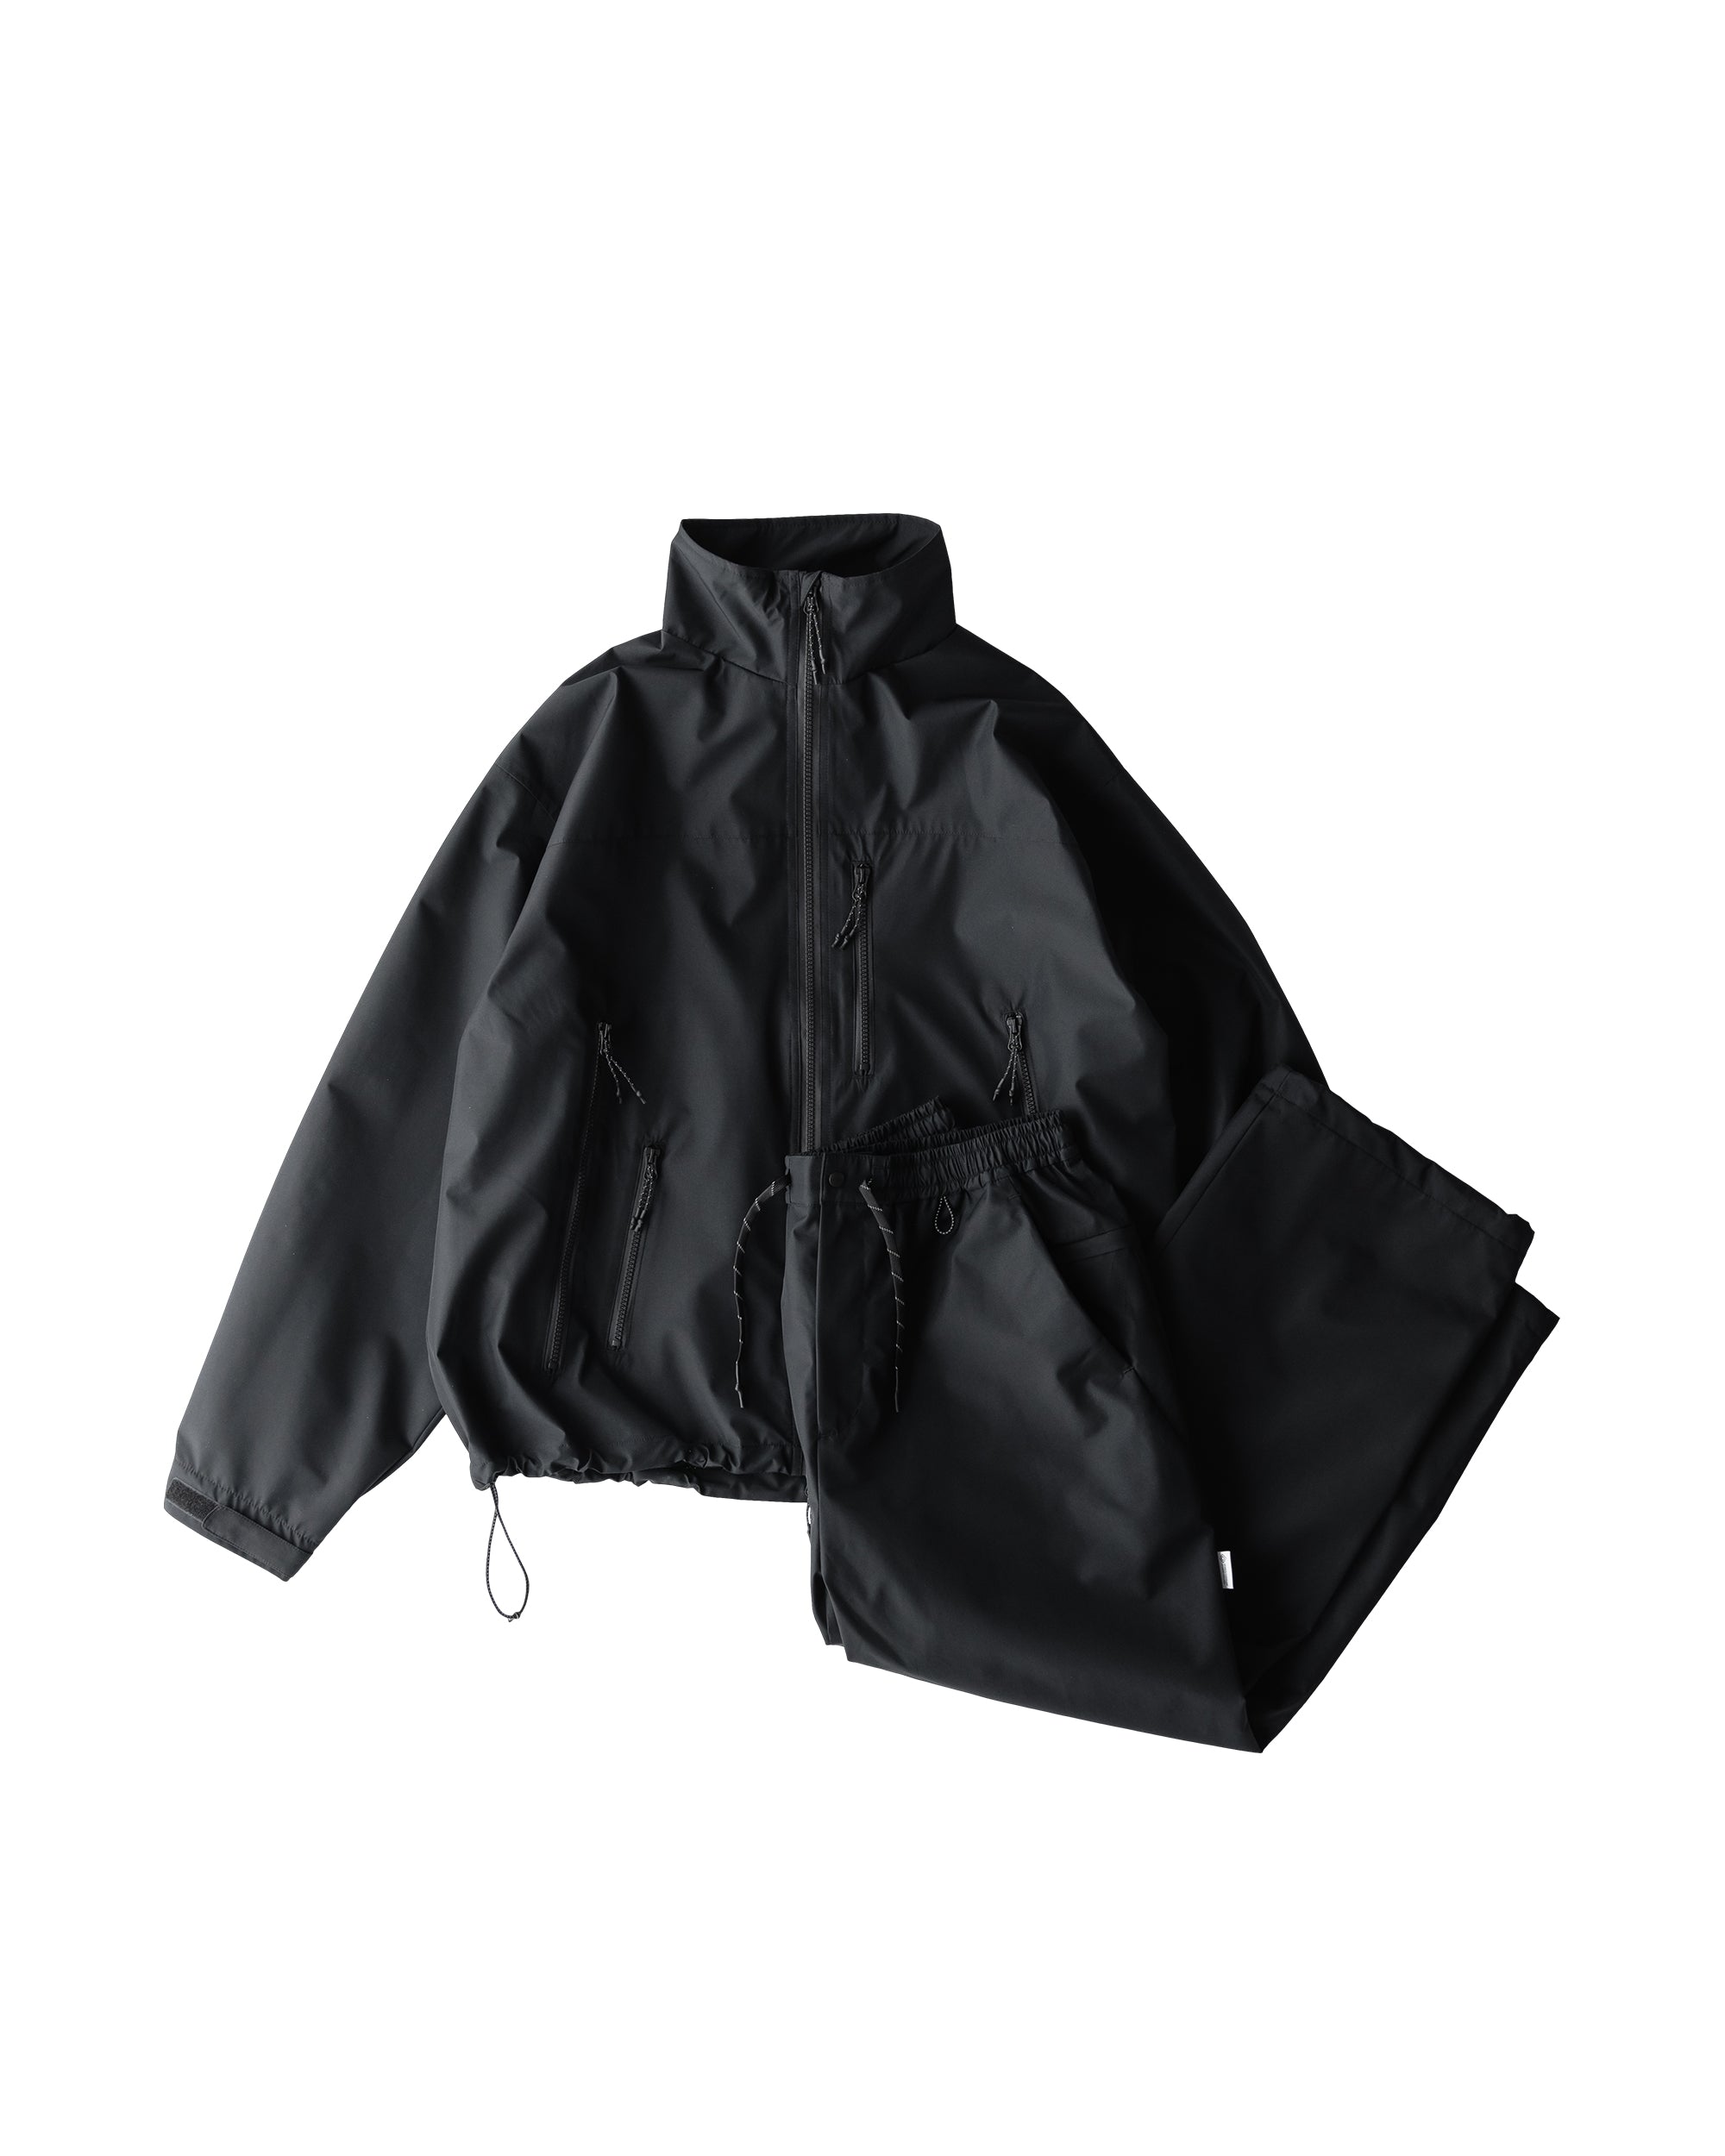 【2.28 wed 20:00- In stock】+phenix WINDSTOPPER® by GORE-TEX LABS CITY SETUP